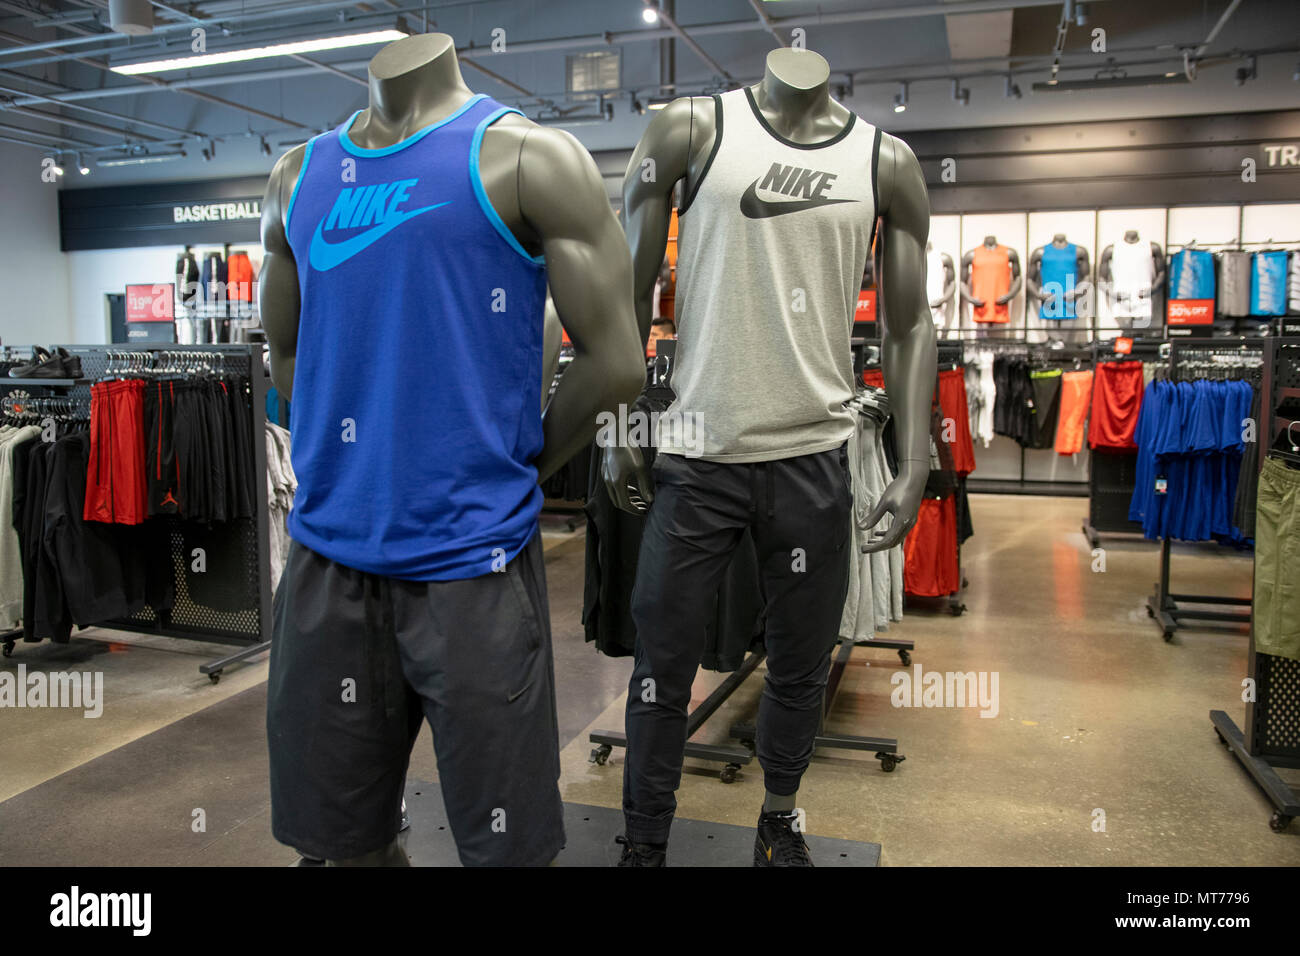 Mannequins in the men's department of Niketown at the Tanger outlet mall in Deer Park Long Island, New York. Stock Photo